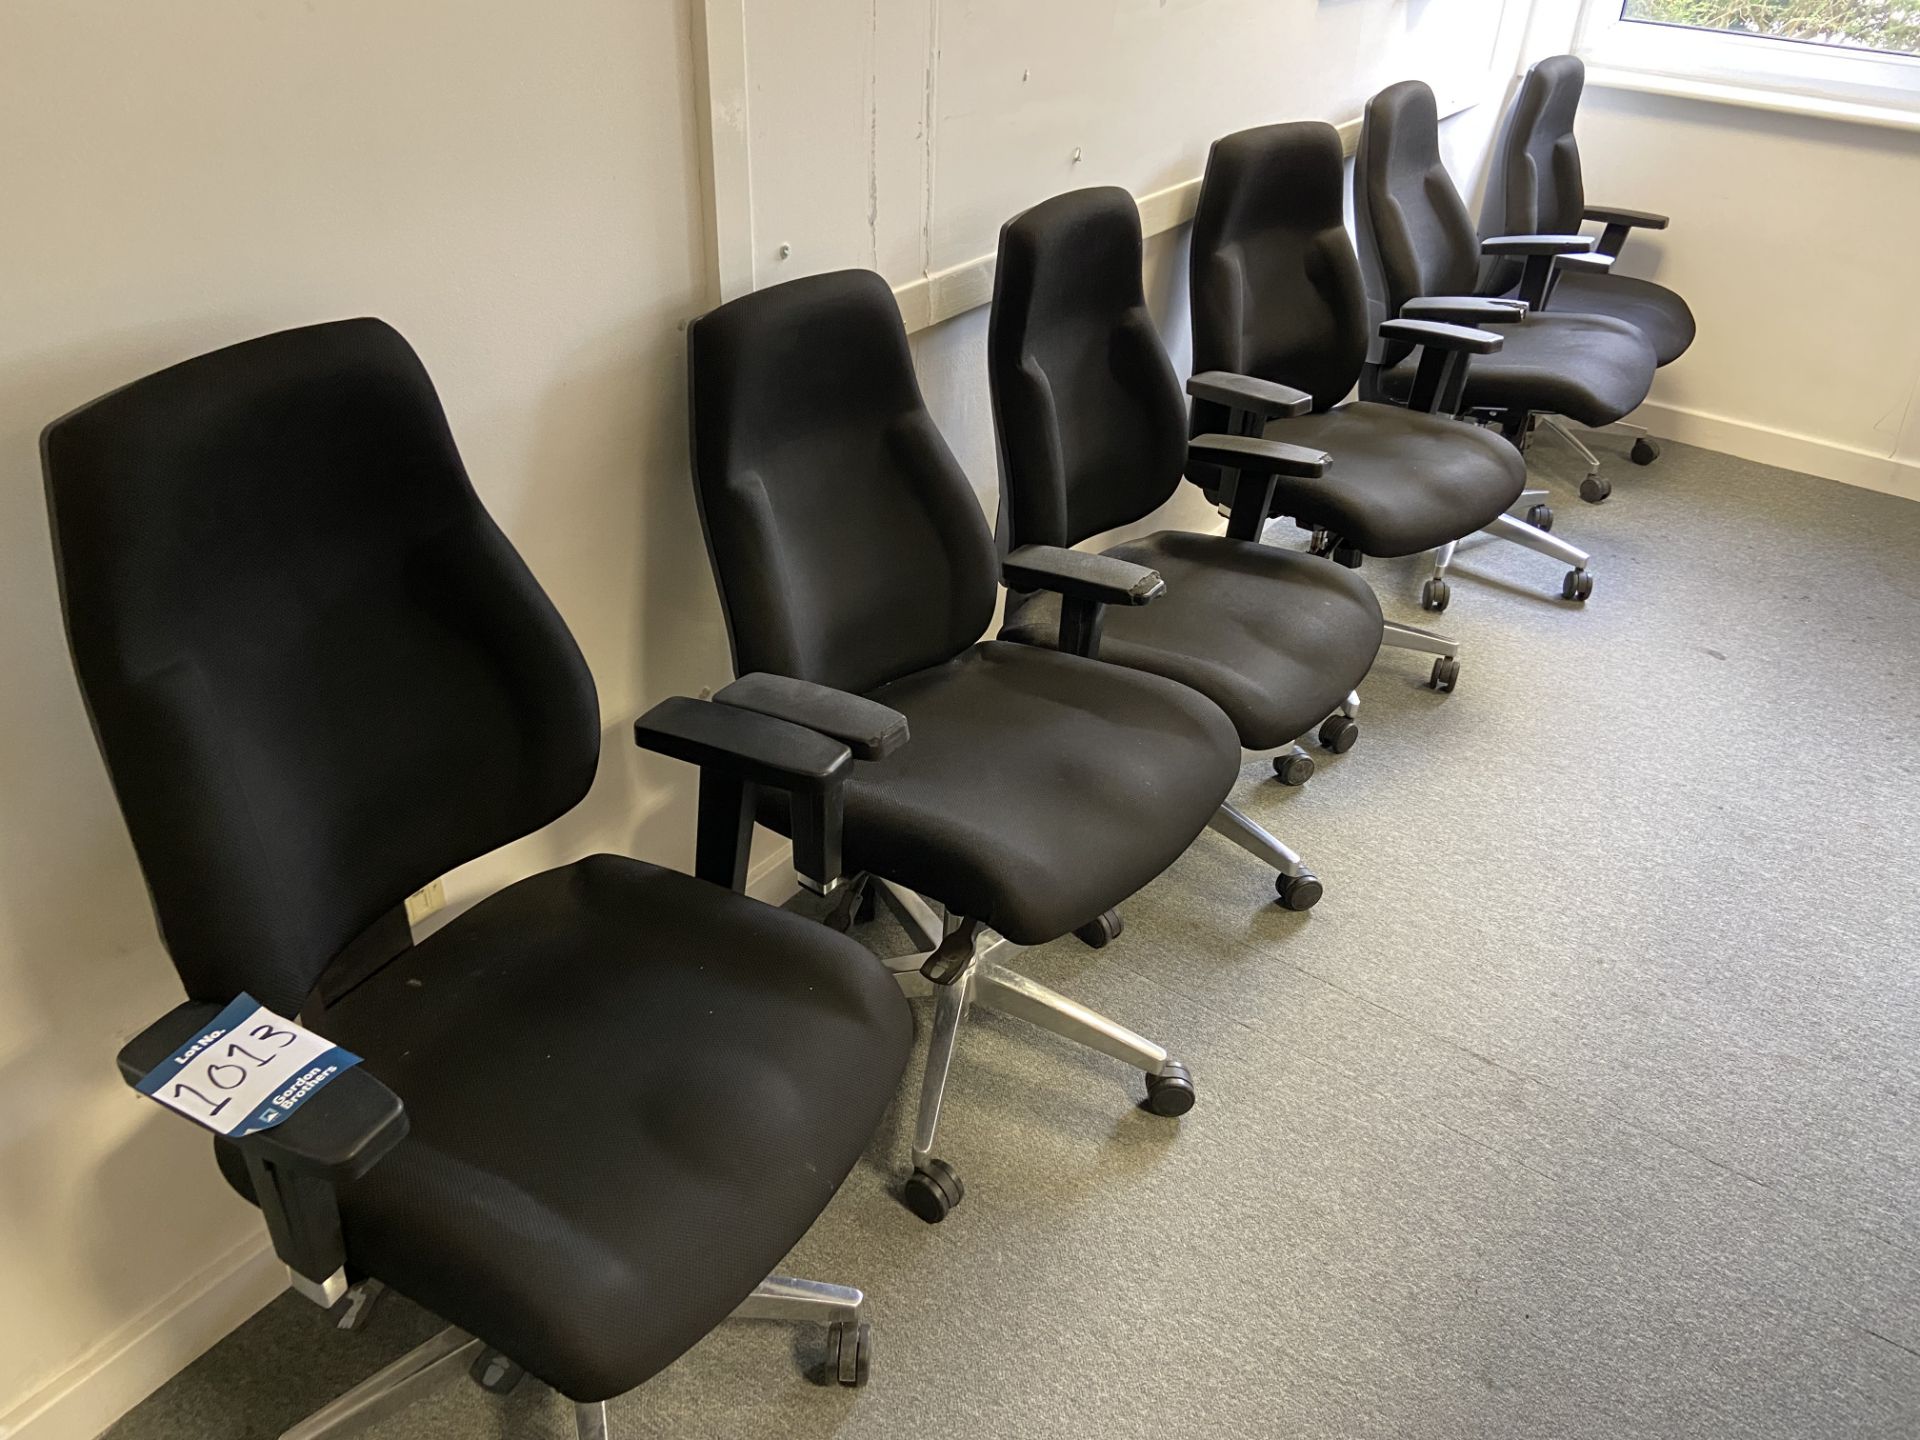 Lot comprisng: six office chairs